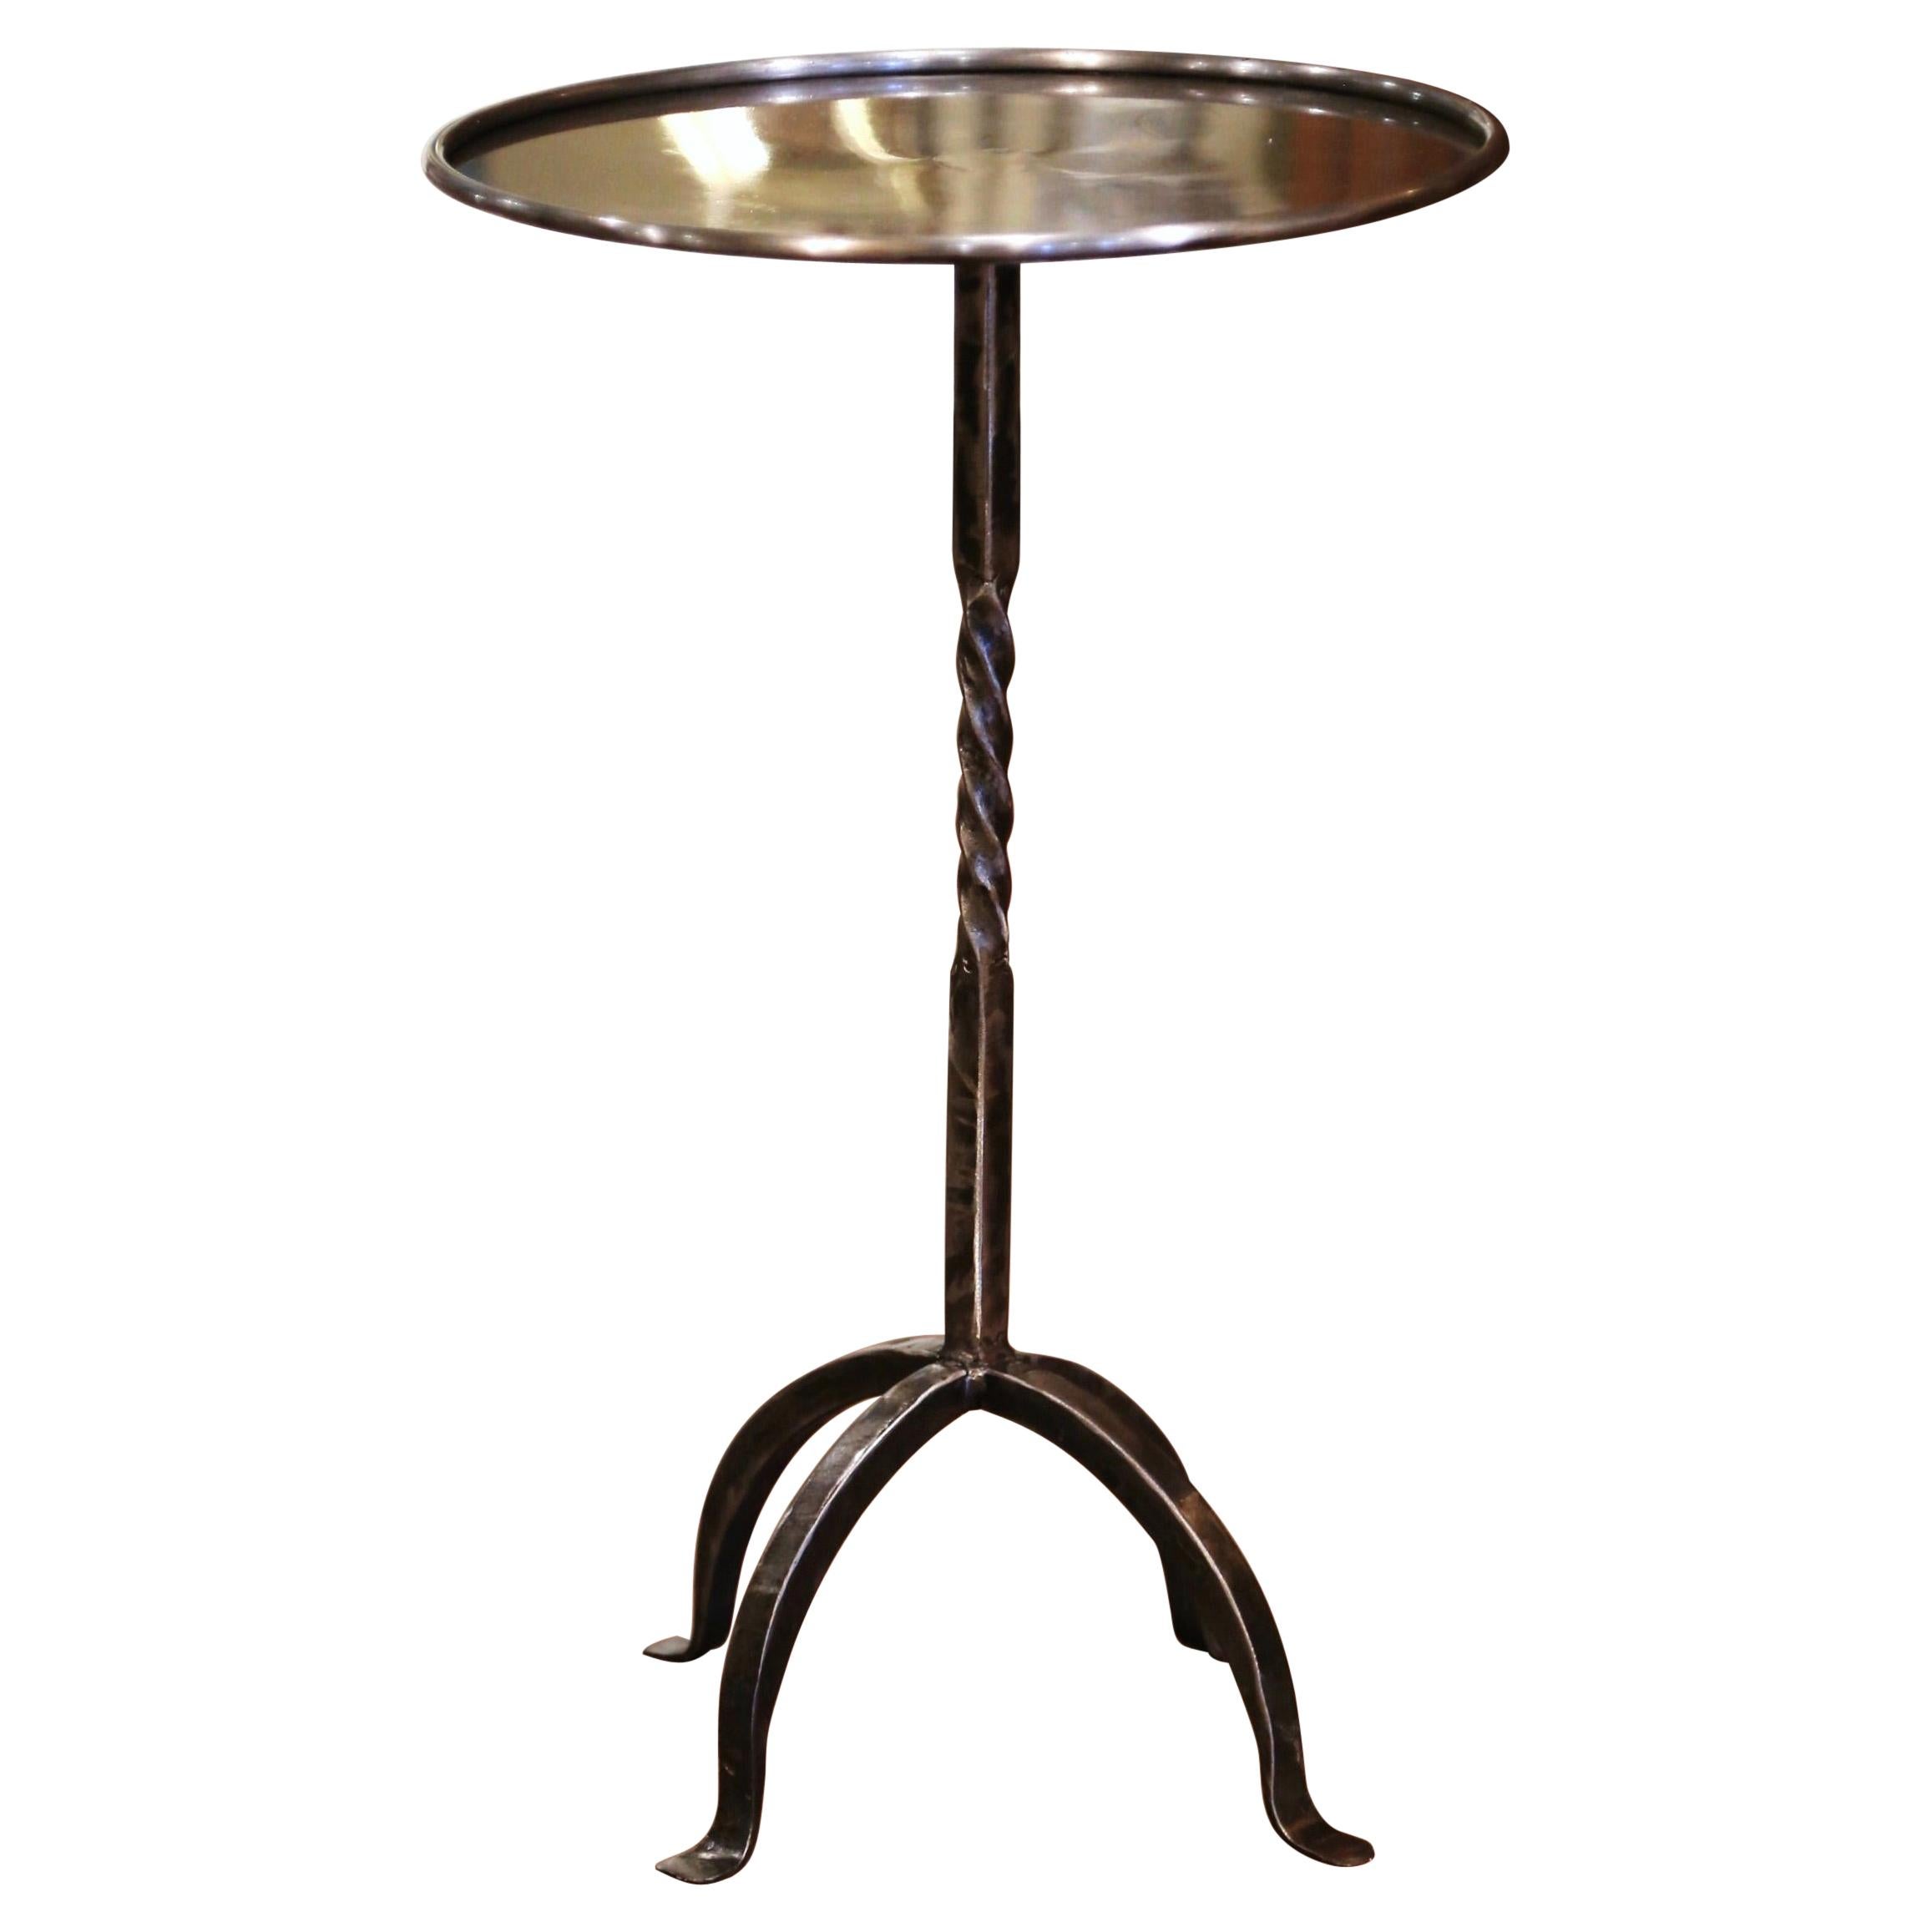 Mid-20th Century French Style Polished Iron Pedestal Martini Side Table